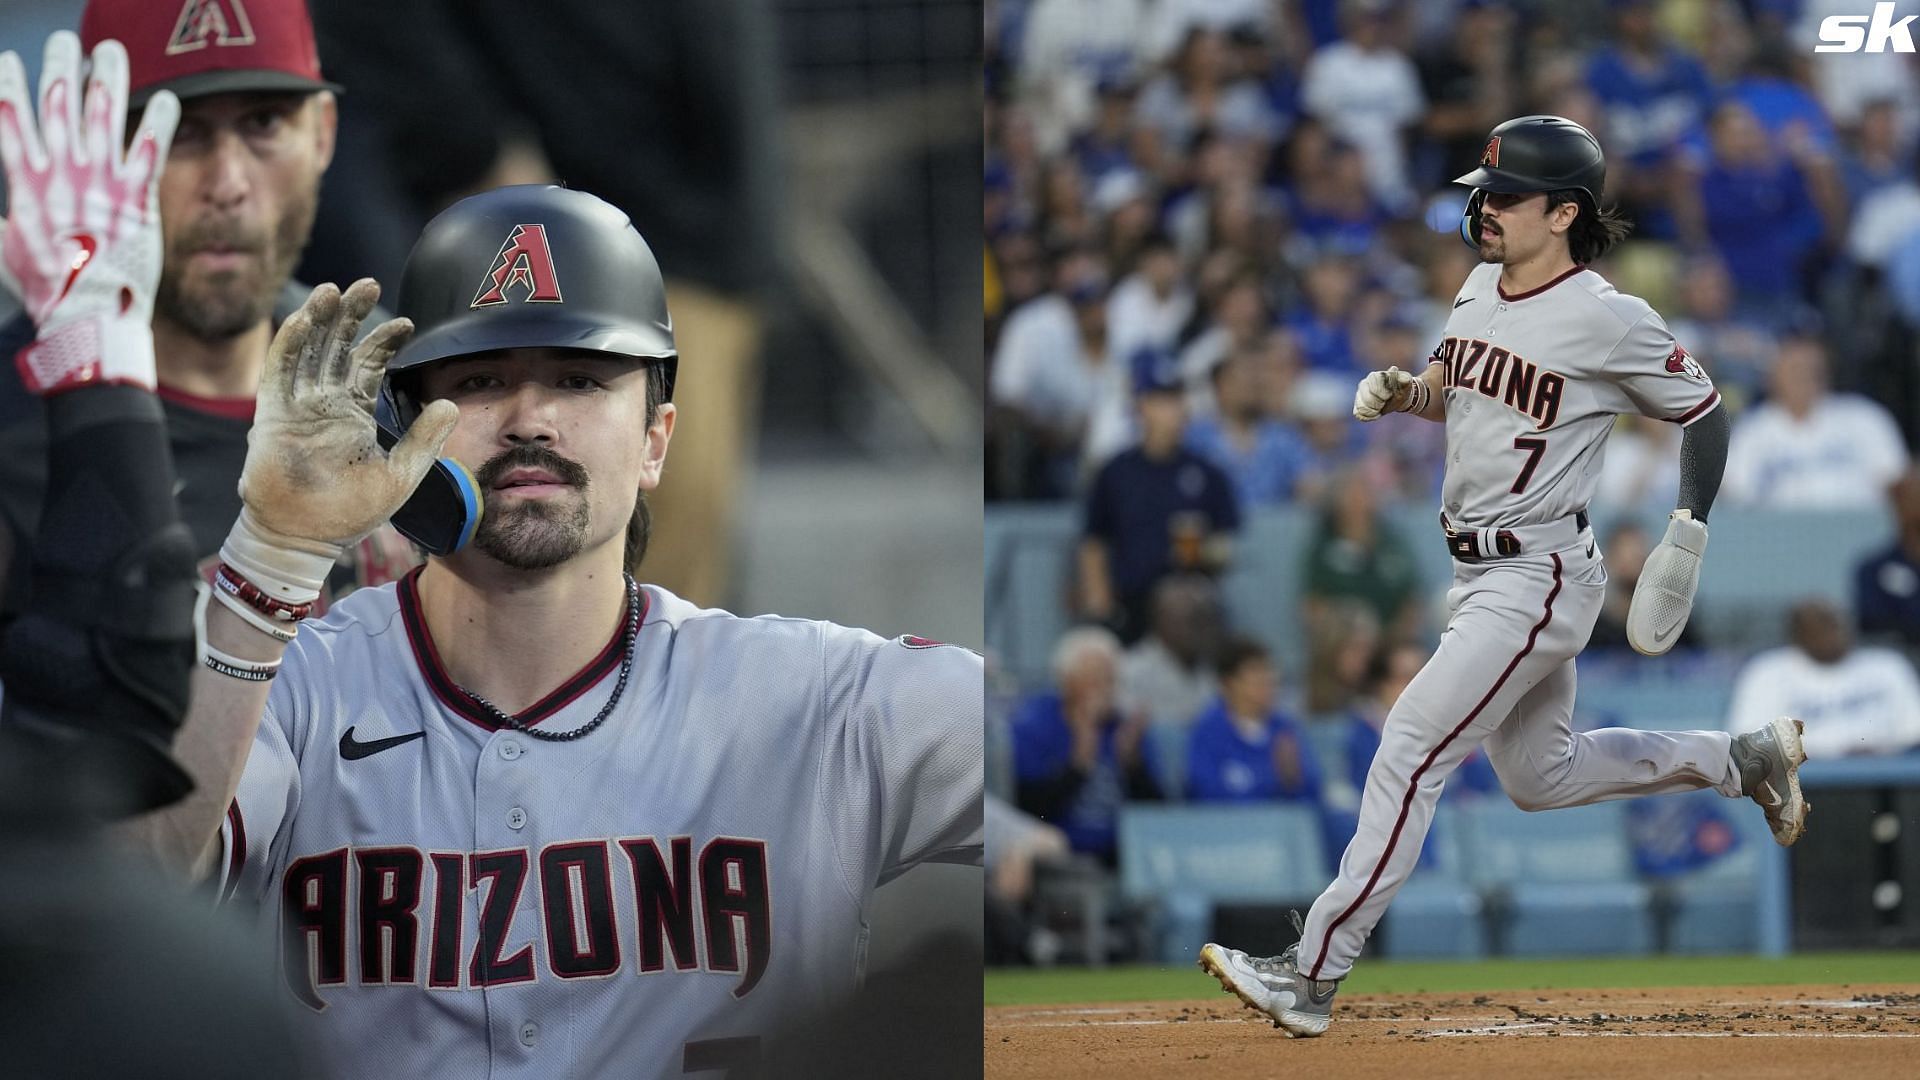 MLB on X: The D-backs stunned LA in Game 1. Will they keep the